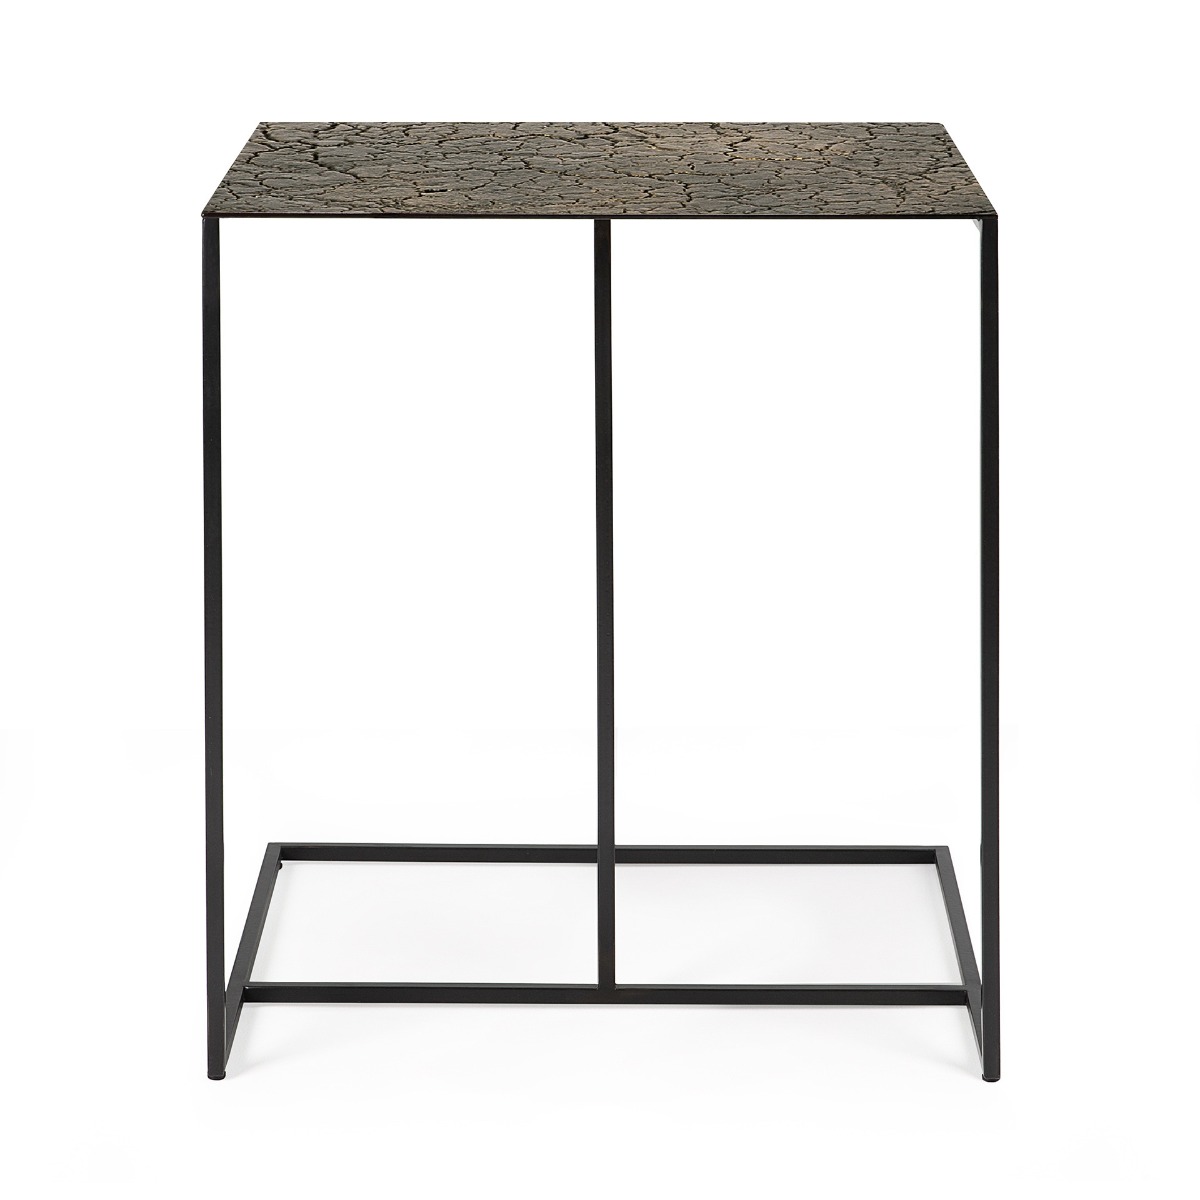 Triptic side table in lava whisky